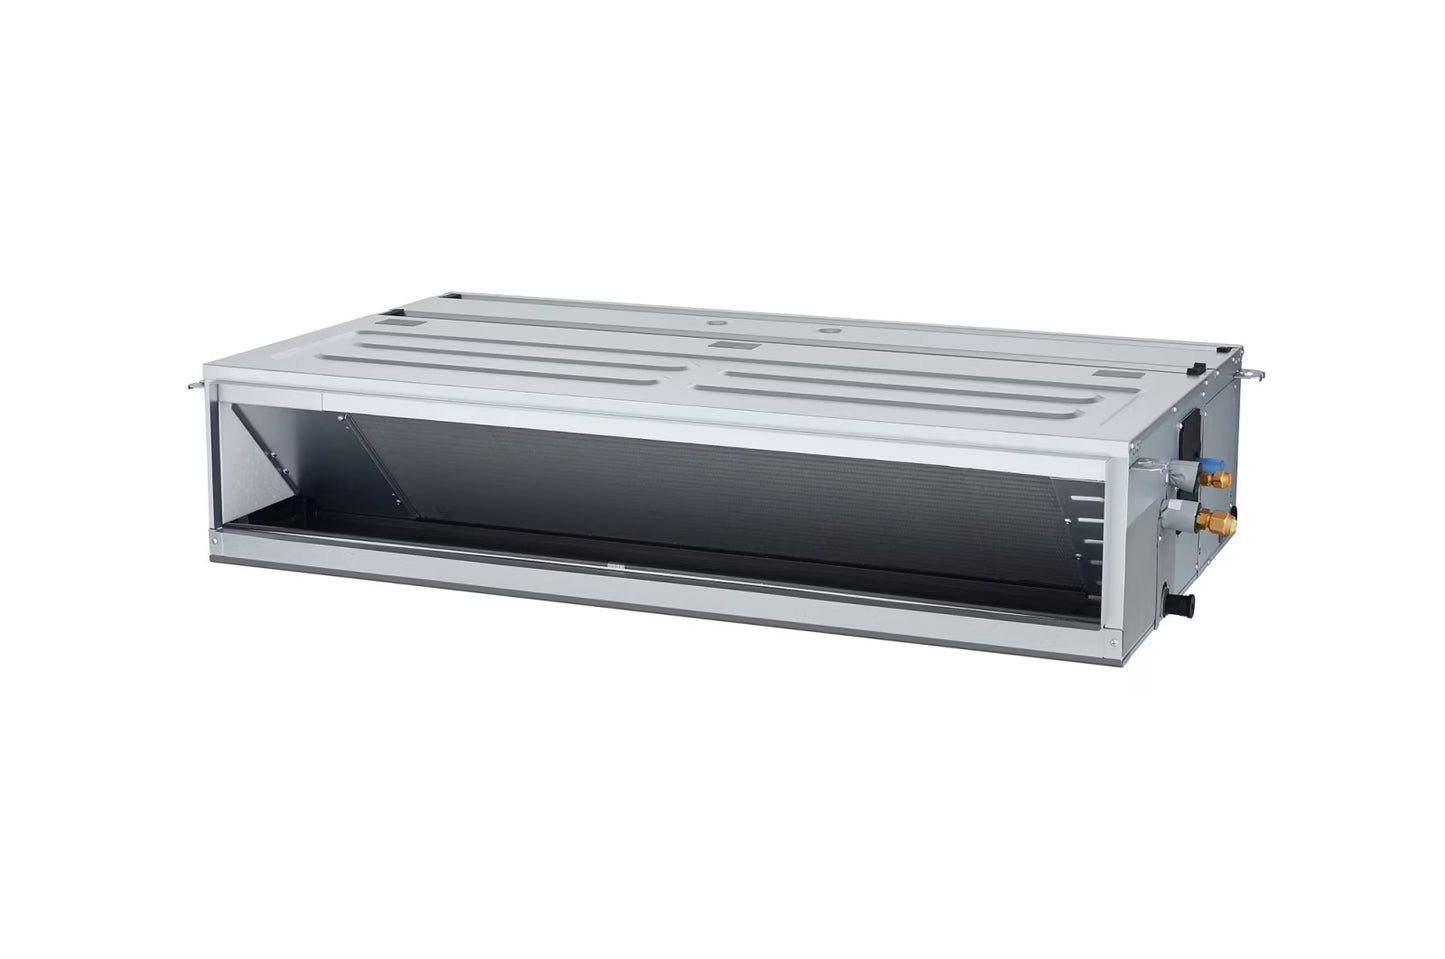 LG Ceiling Concealed Duct INV Unit 7.1KW with Mid Static and E.S.P. Control for Multiple Rooms - ARNU24GM1A4